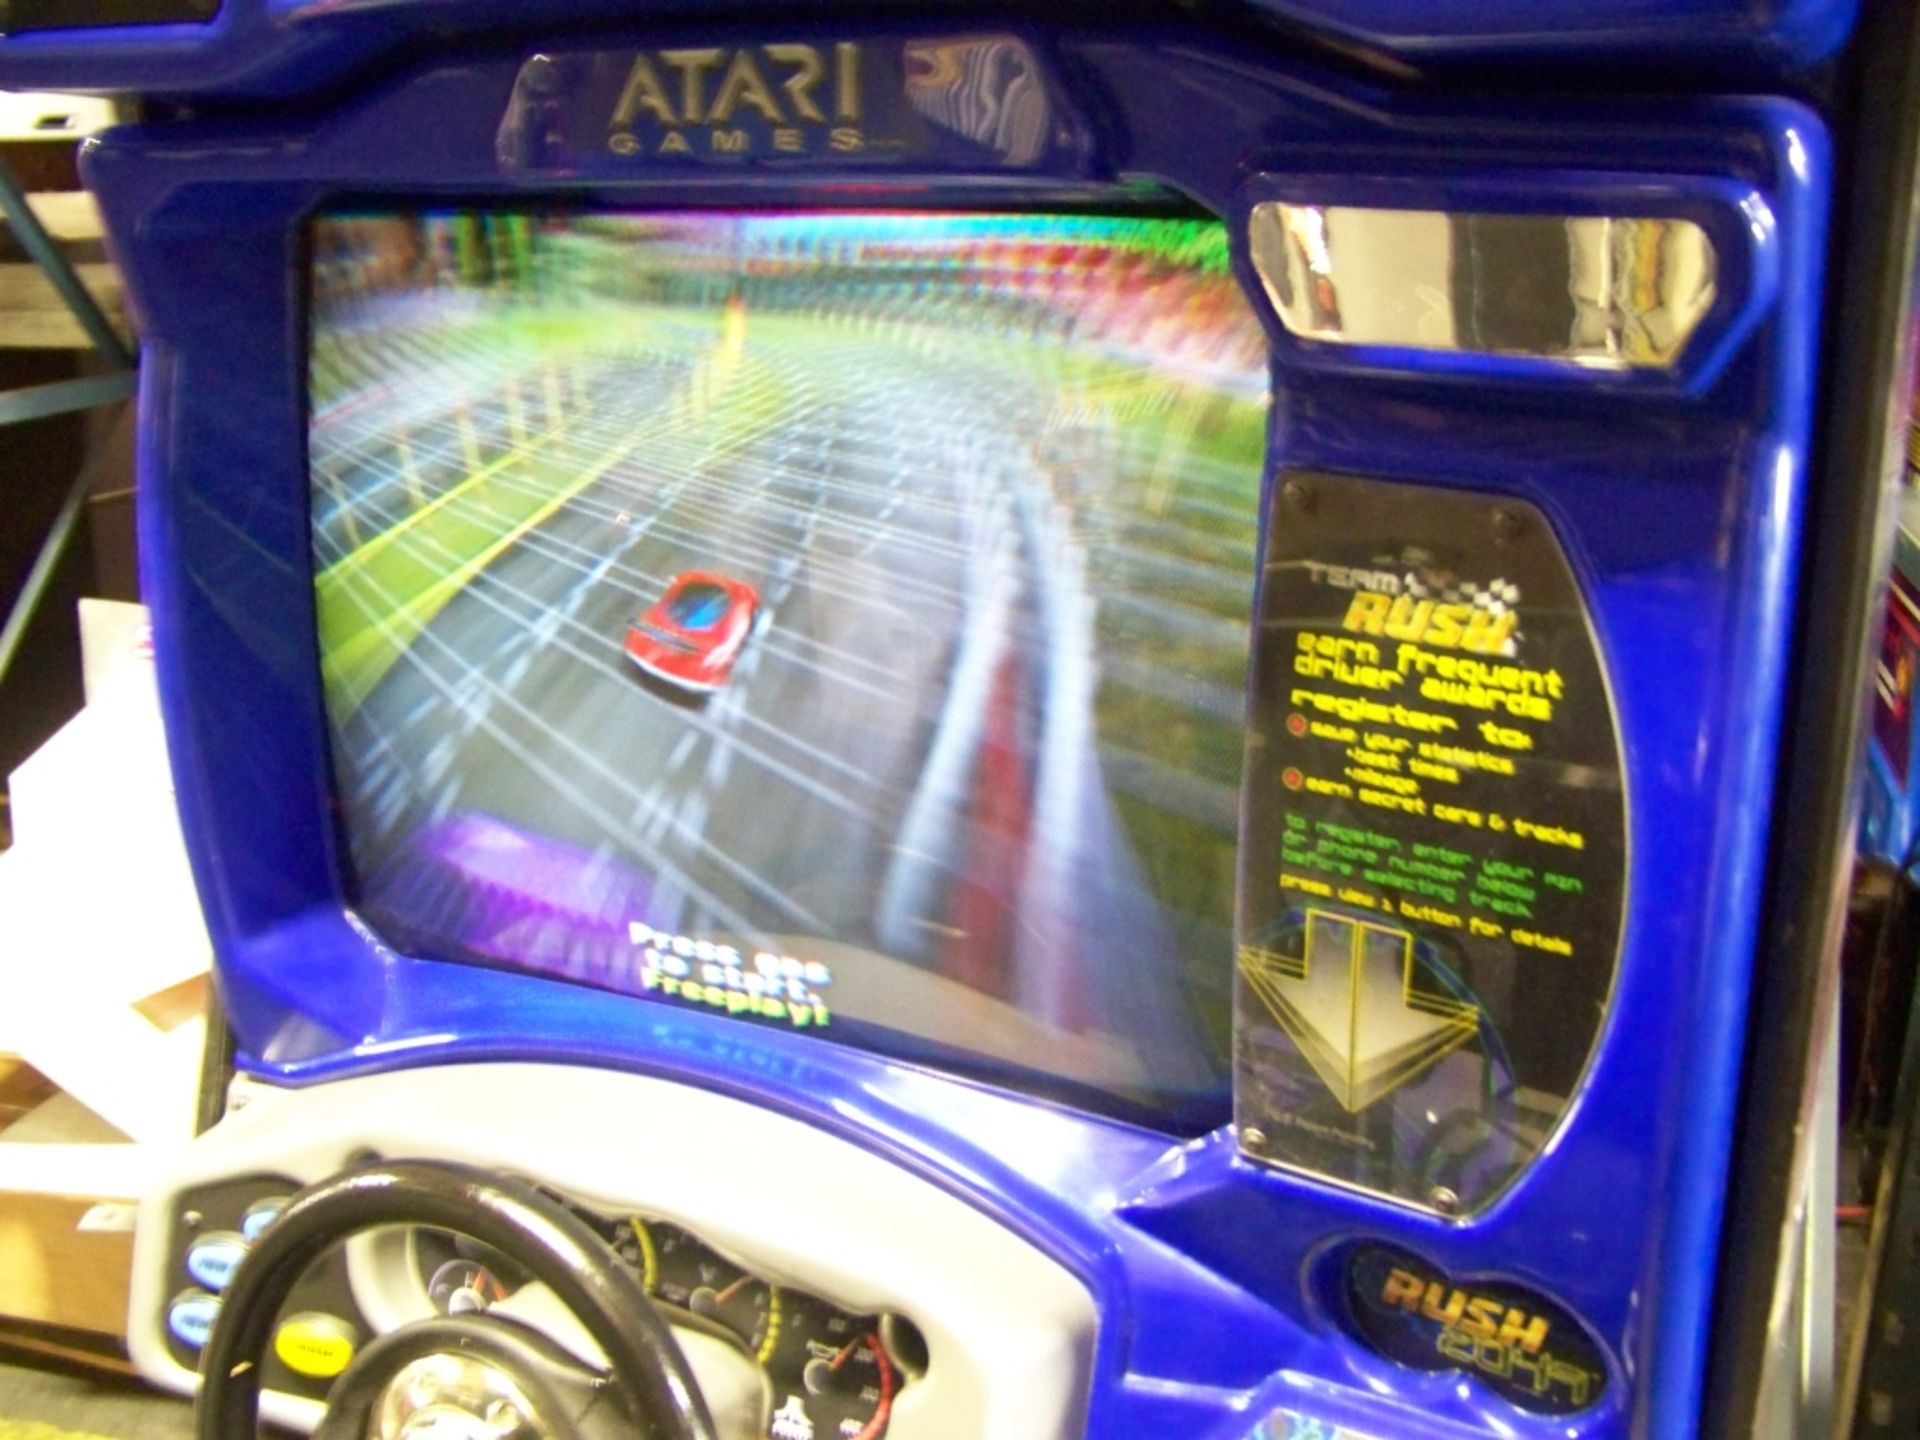 RUSH 2049 SPECIAL ED. RACING ARCADE GAME - Image 6 of 6